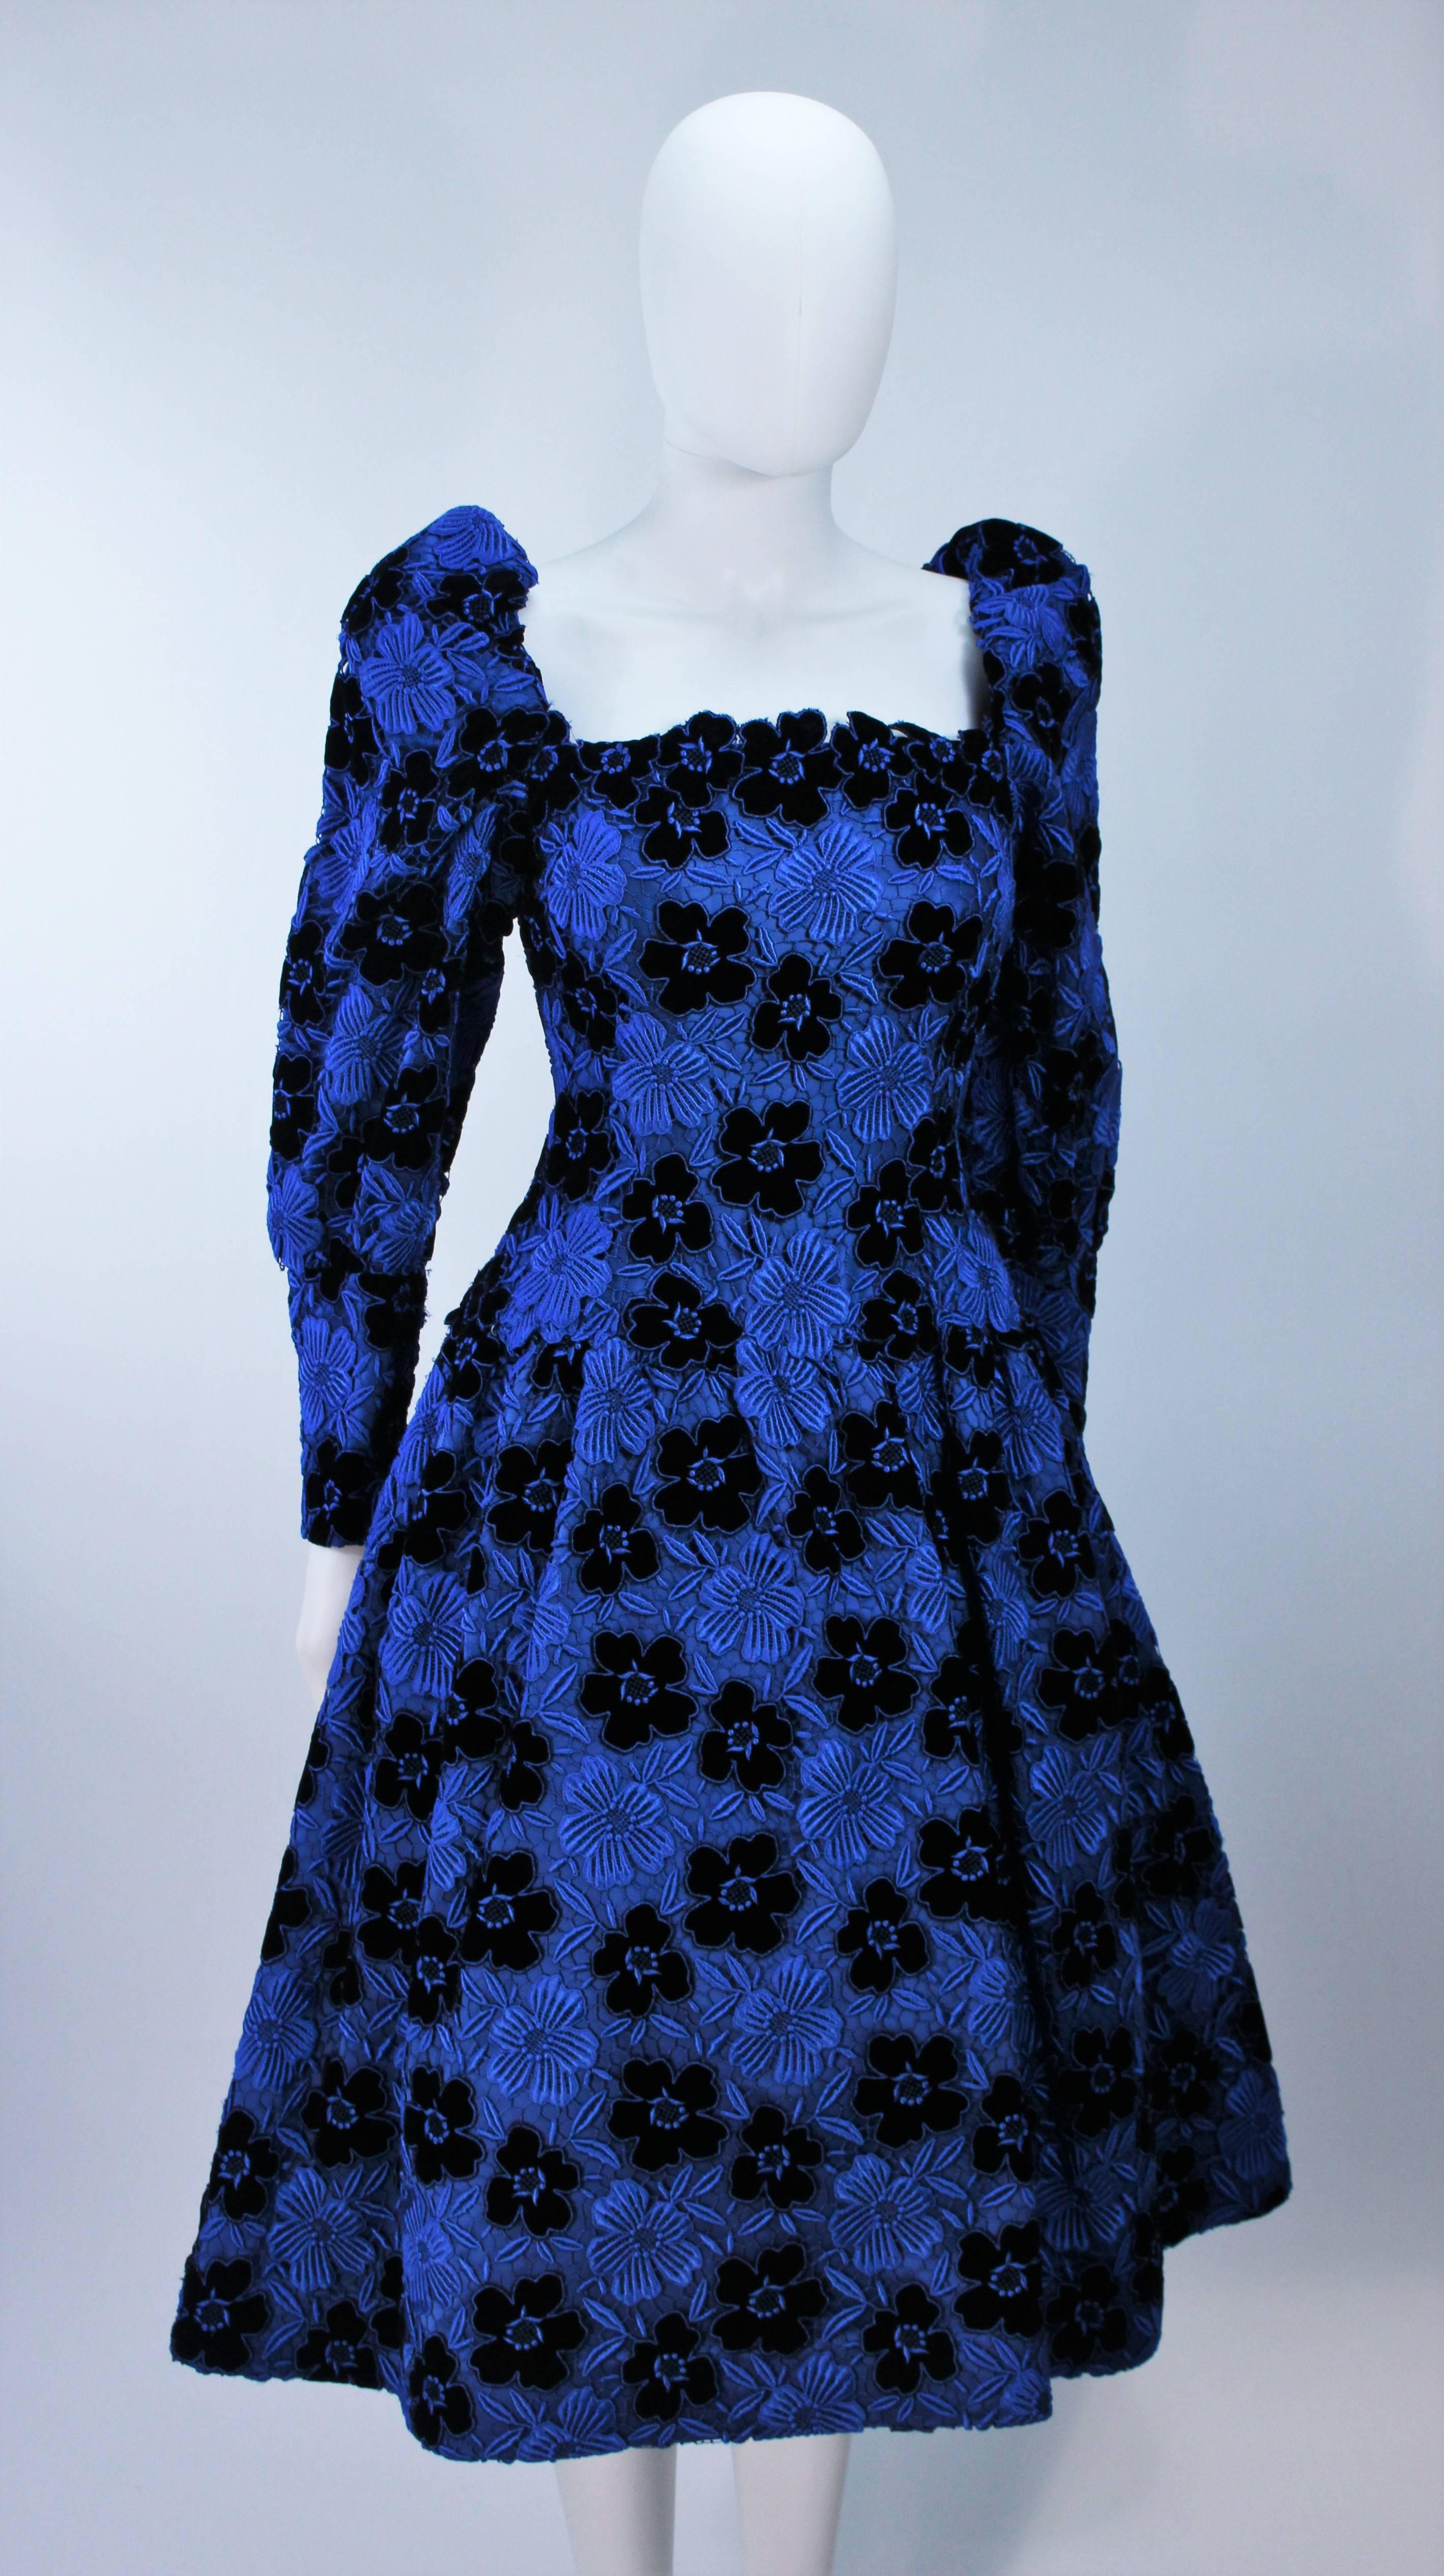 ARNOLD SCAASI Cobalt Blue Evening Dress with Floral Pattern Size 10-12 1